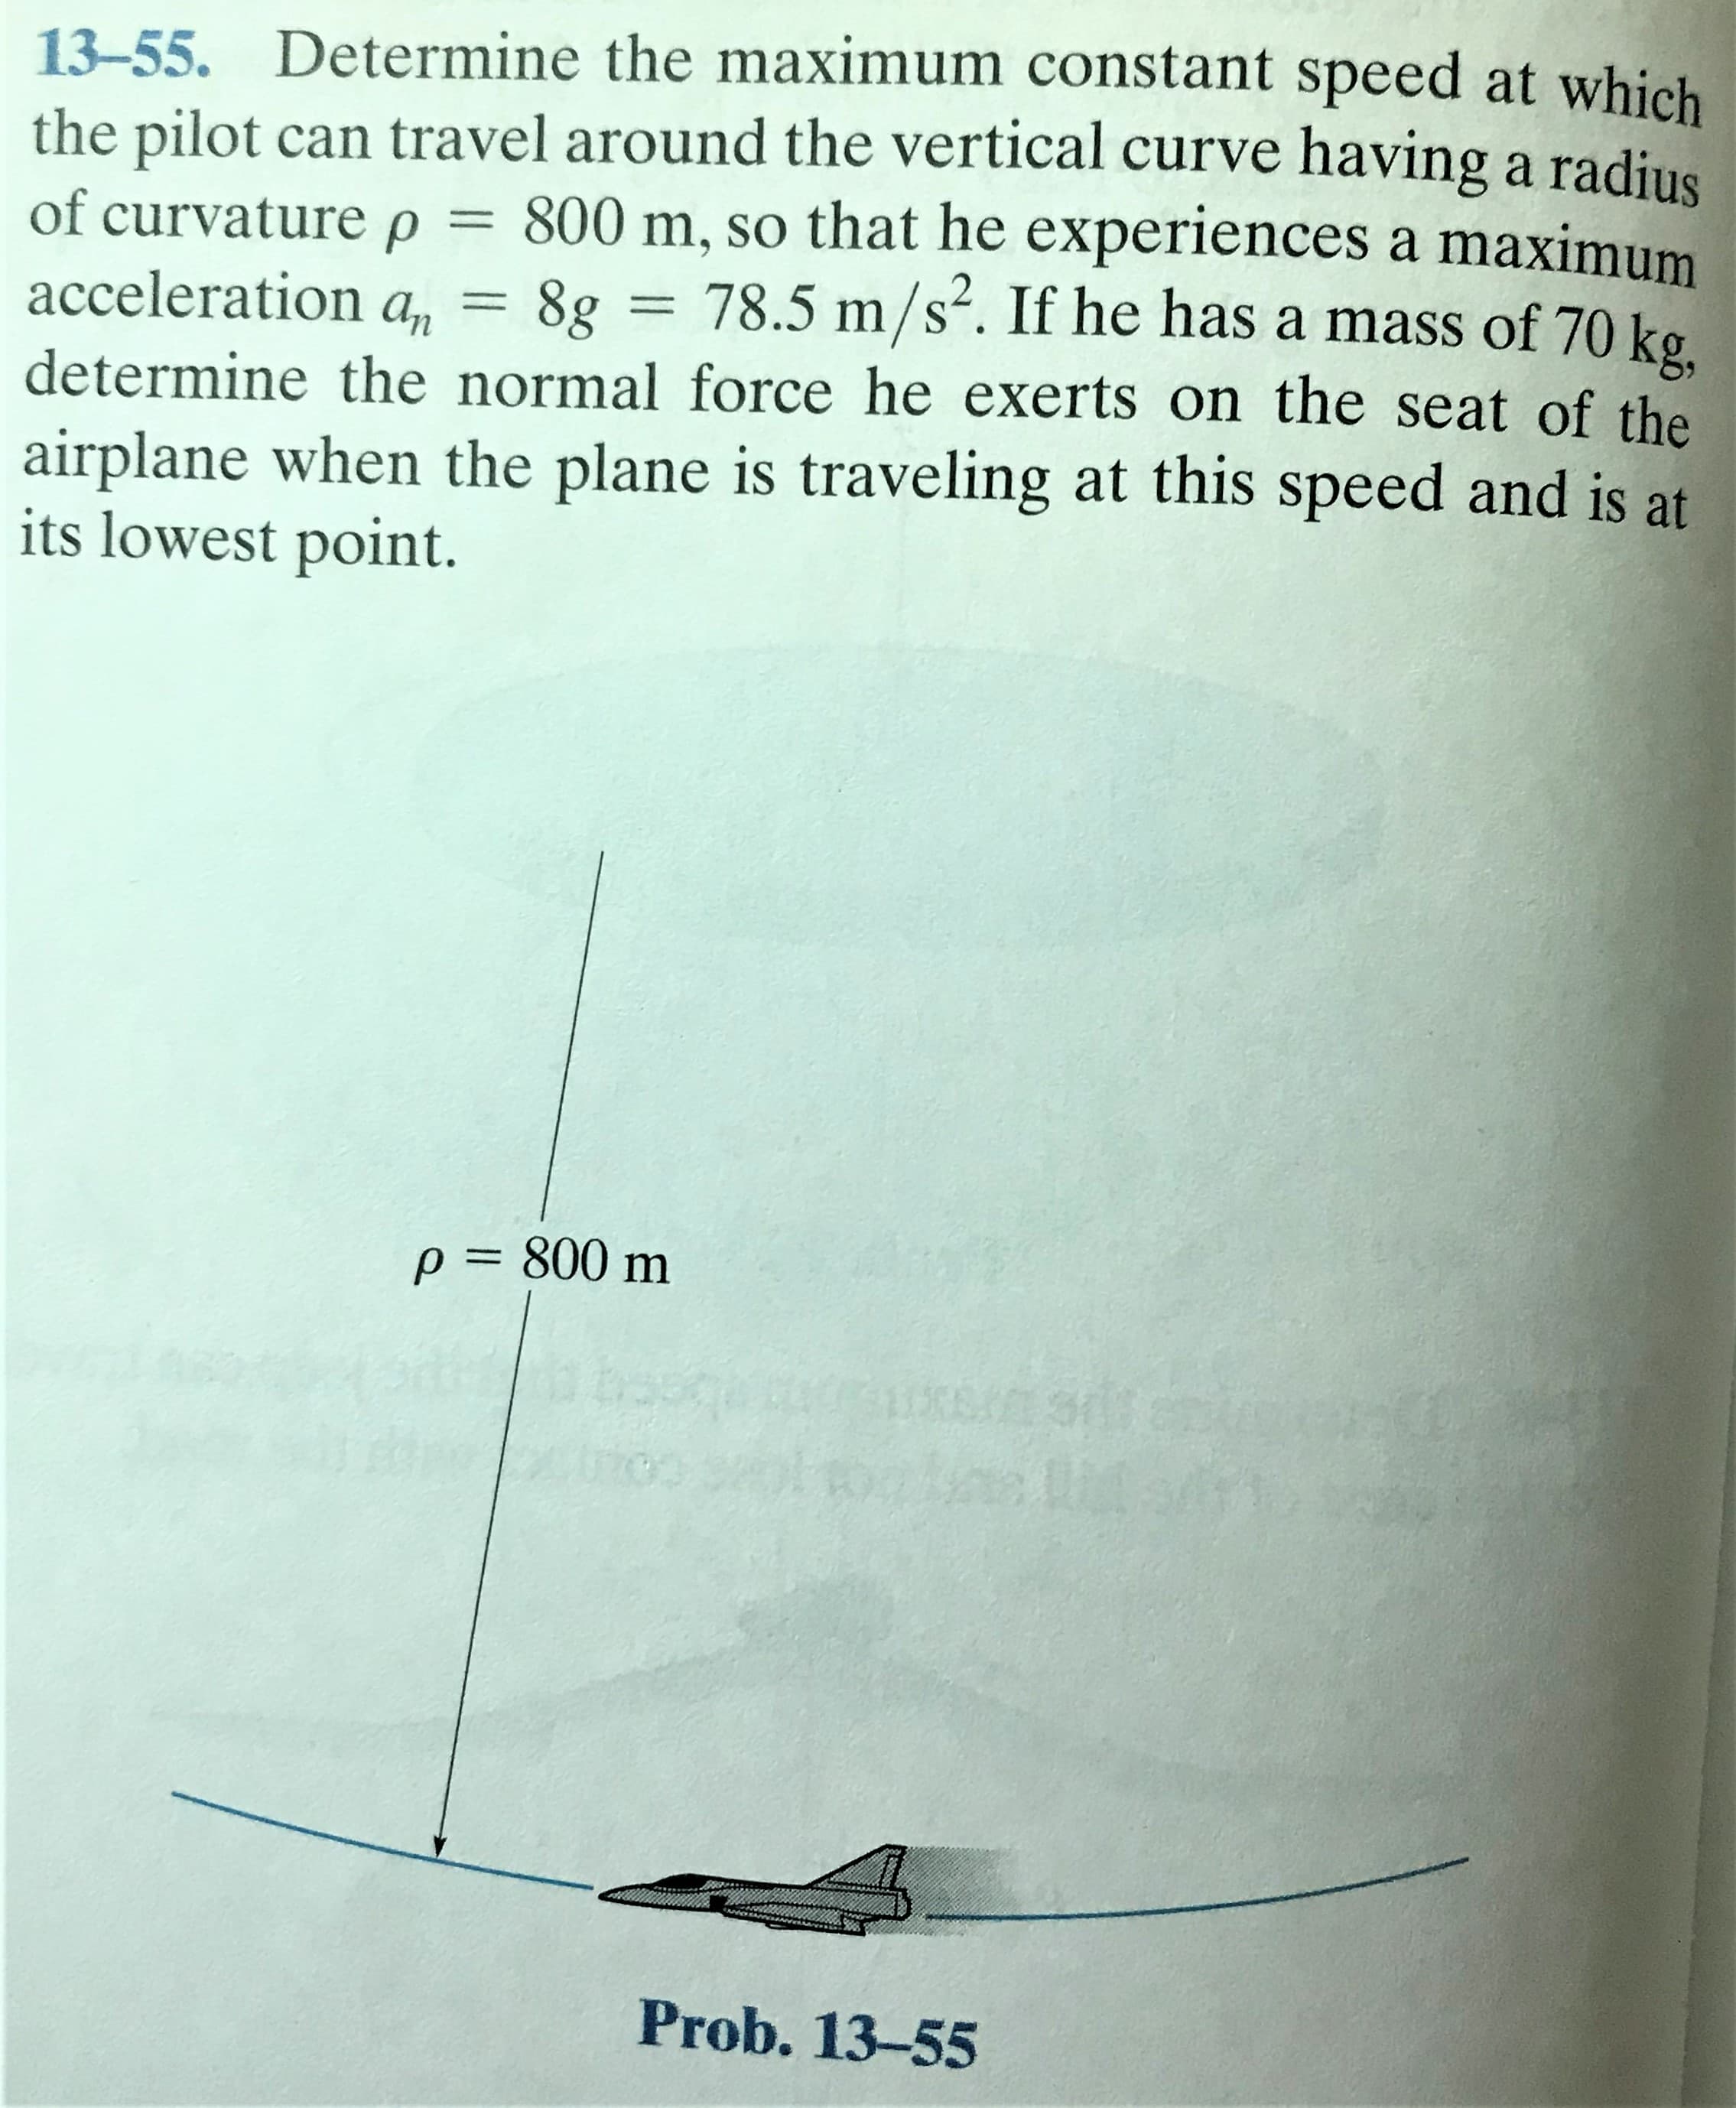 13-55. Determine the maximum constant speed at which
the pilot can travel around the vertical curve having a radjus
of curvature p = 800 m, so that he experiences a maximum
acceleration a, = 8g = 78.5 m/s². If he has a mass of 70 kg
determine the normal force he exerts on the seat of the
airplane when the plane is traveling at this speed and is at
its lowest point.
S'
p= 800 m
Prob. 13-55
